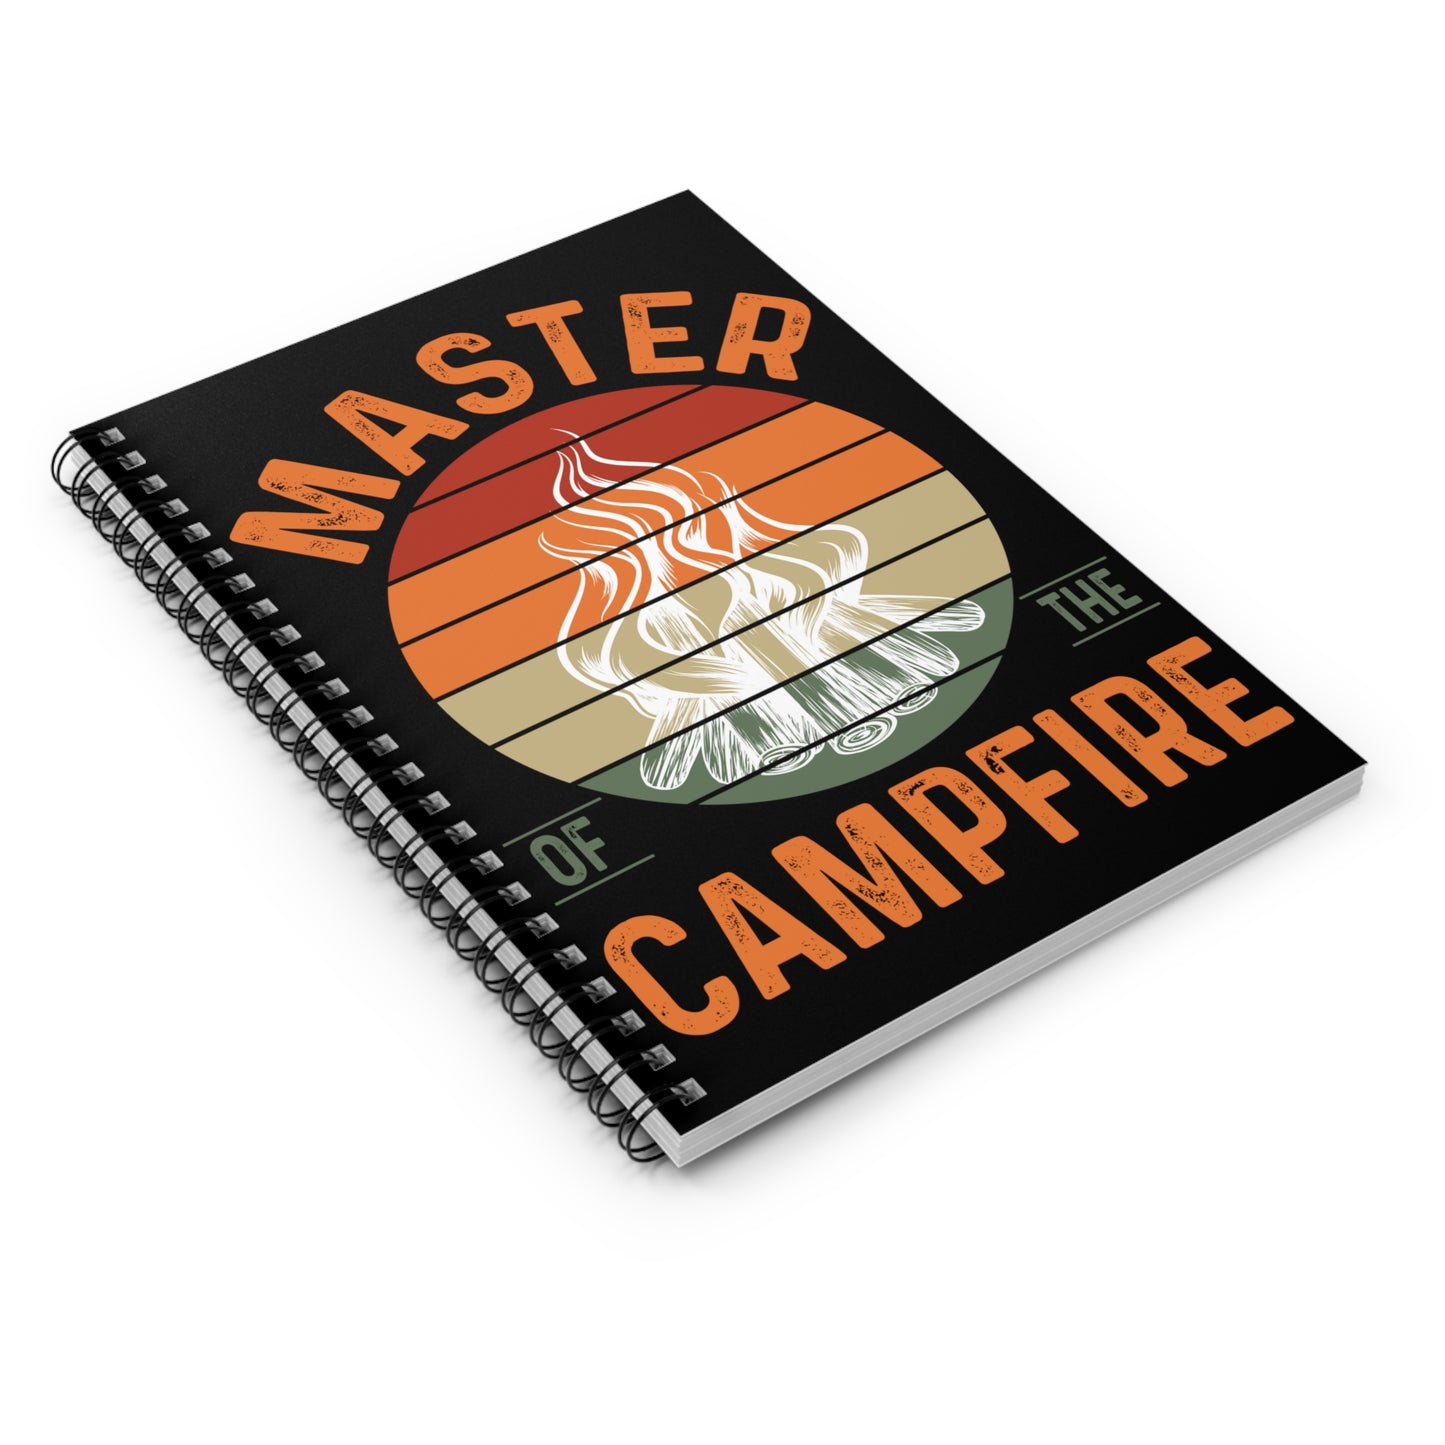 Master of the Campfire: Spiral Notebook - Log Books - Journals - Diaries - and More Custom Printed by TheGlassyLass